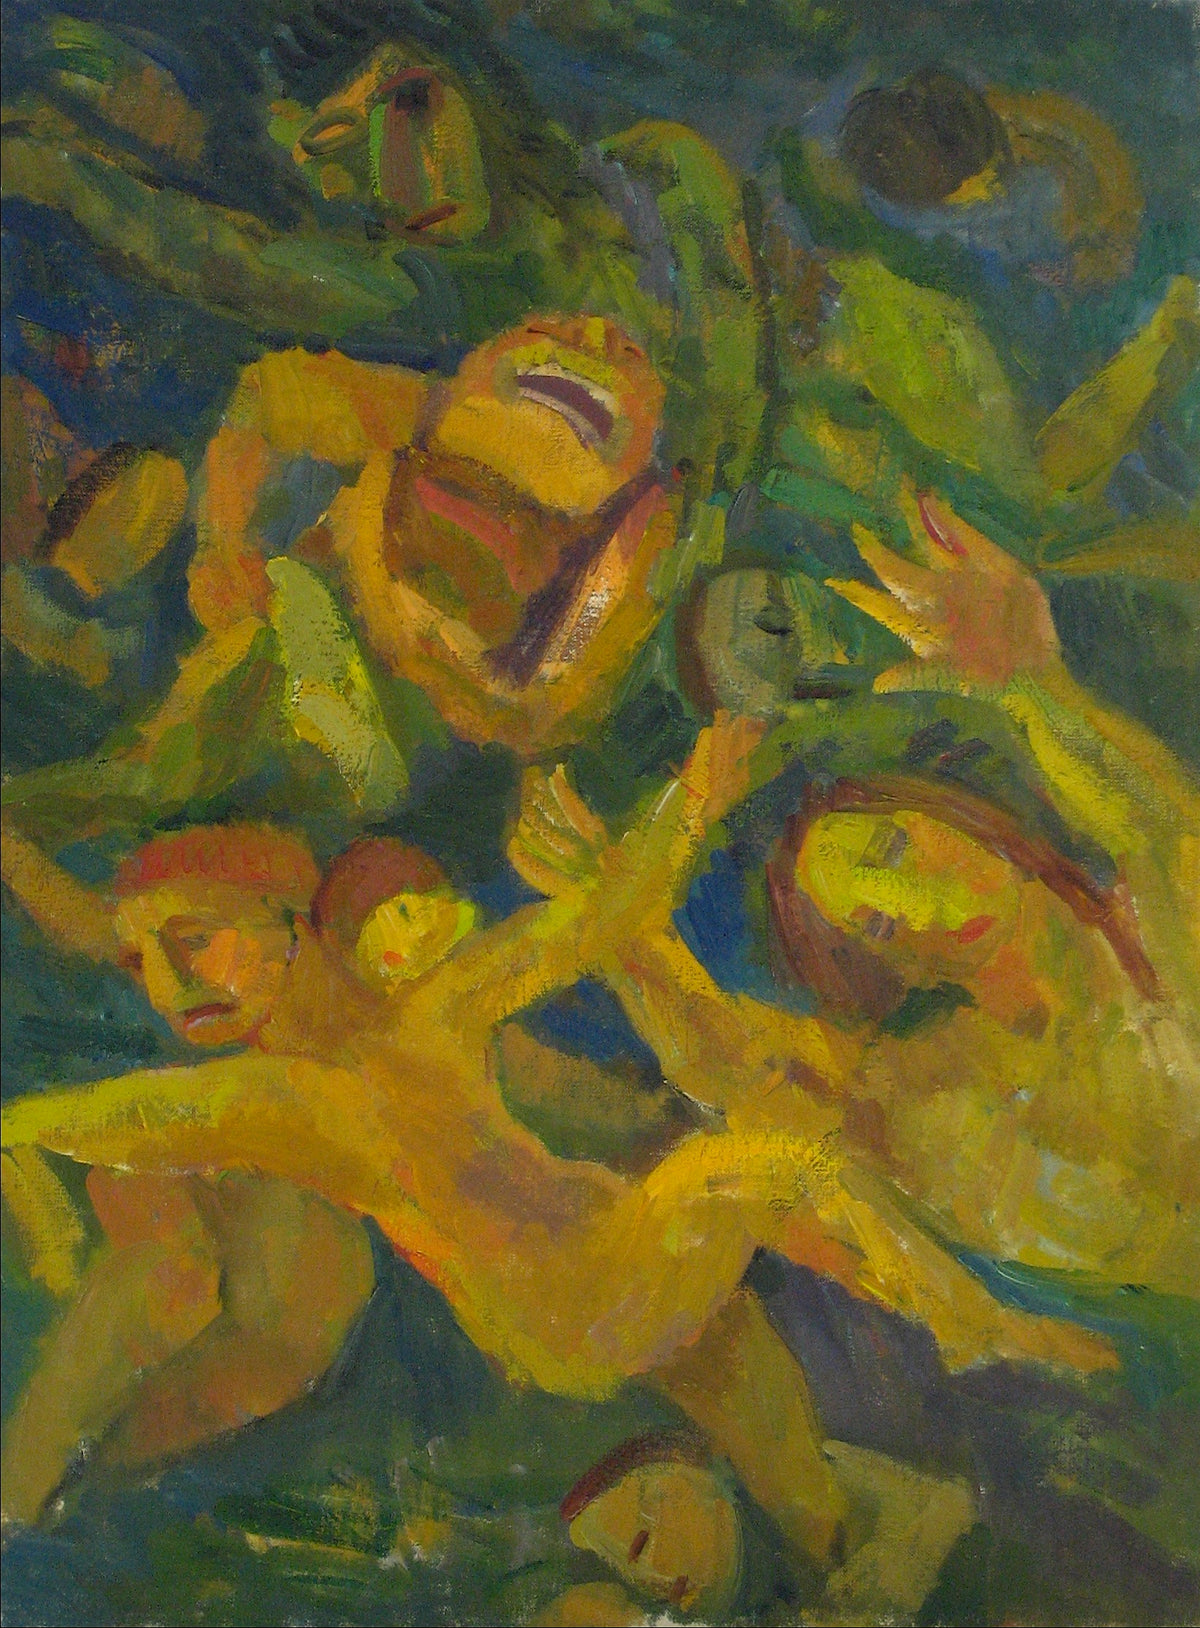 &lt;i&gt;Swimmers&lt;/i&gt;&lt;br&gt;1951 Oil&lt;br&gt;&lt;br&gt;#13958